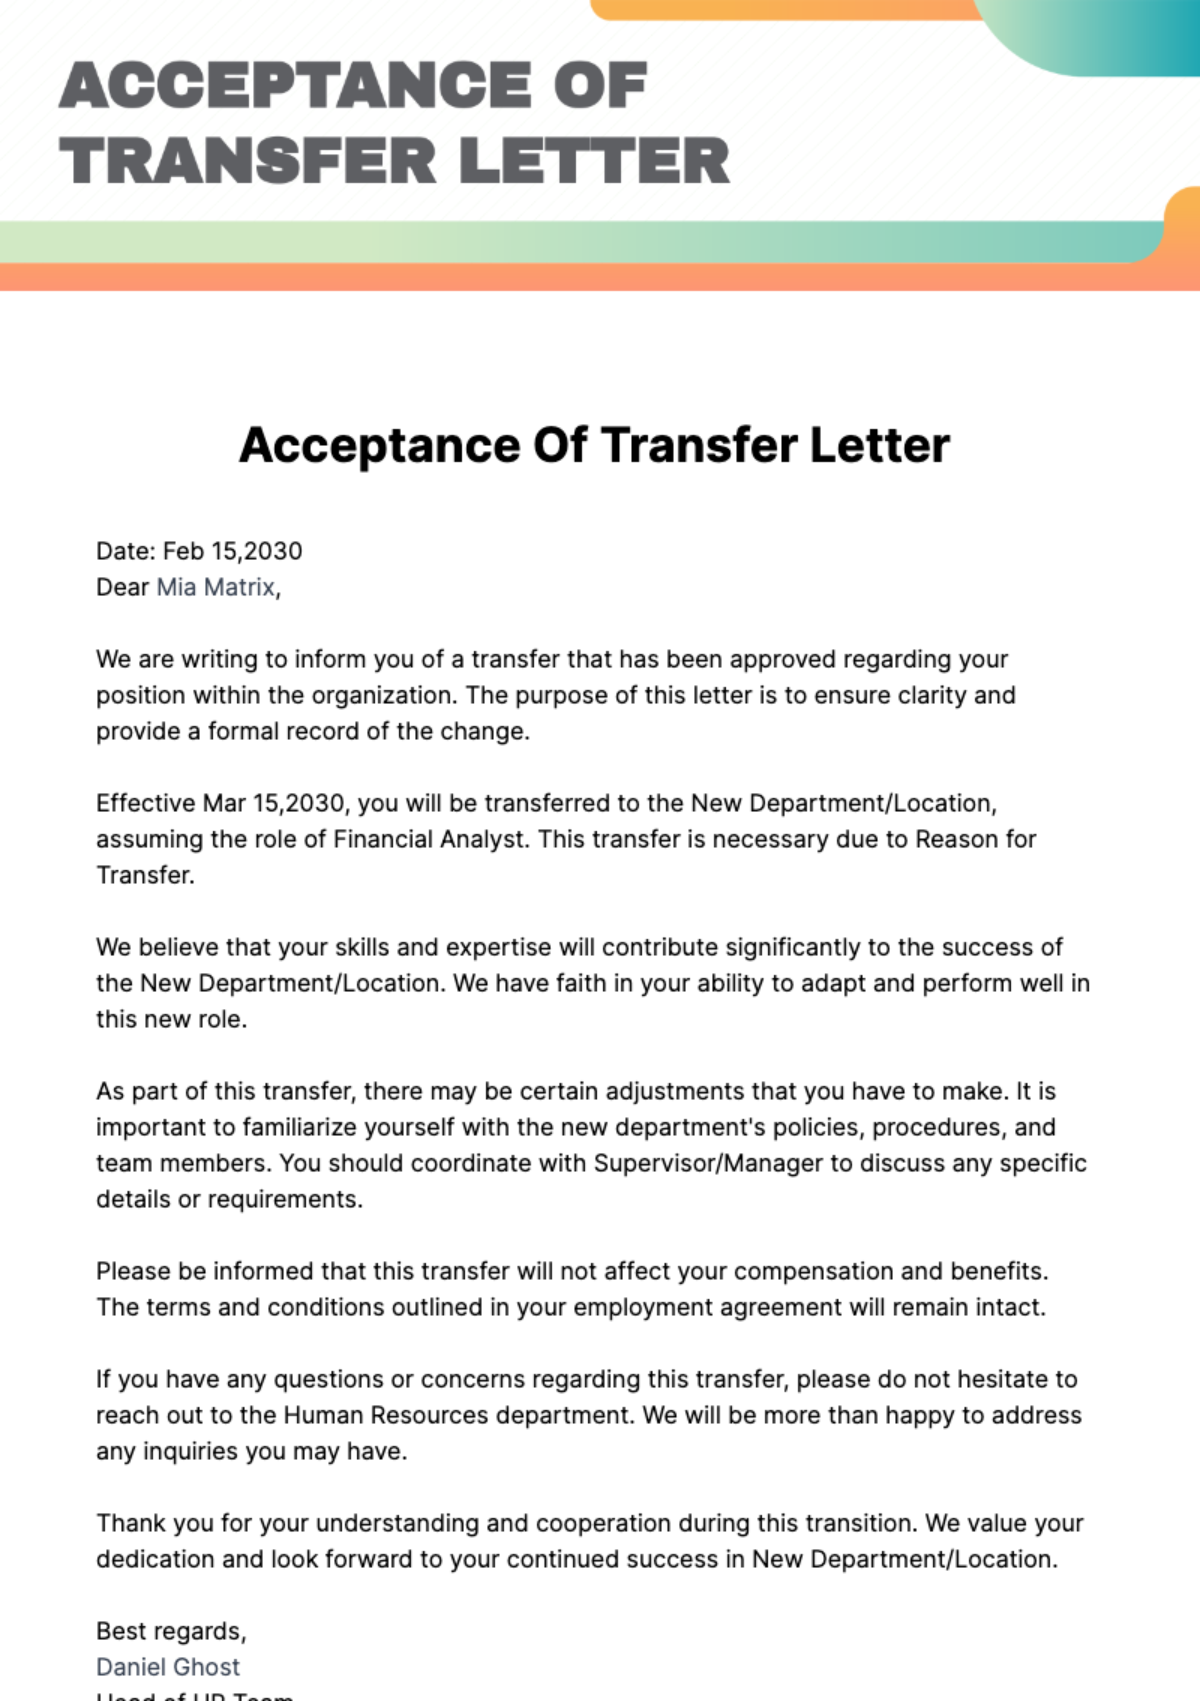 Free Acceptance Of Transfer Letter Template